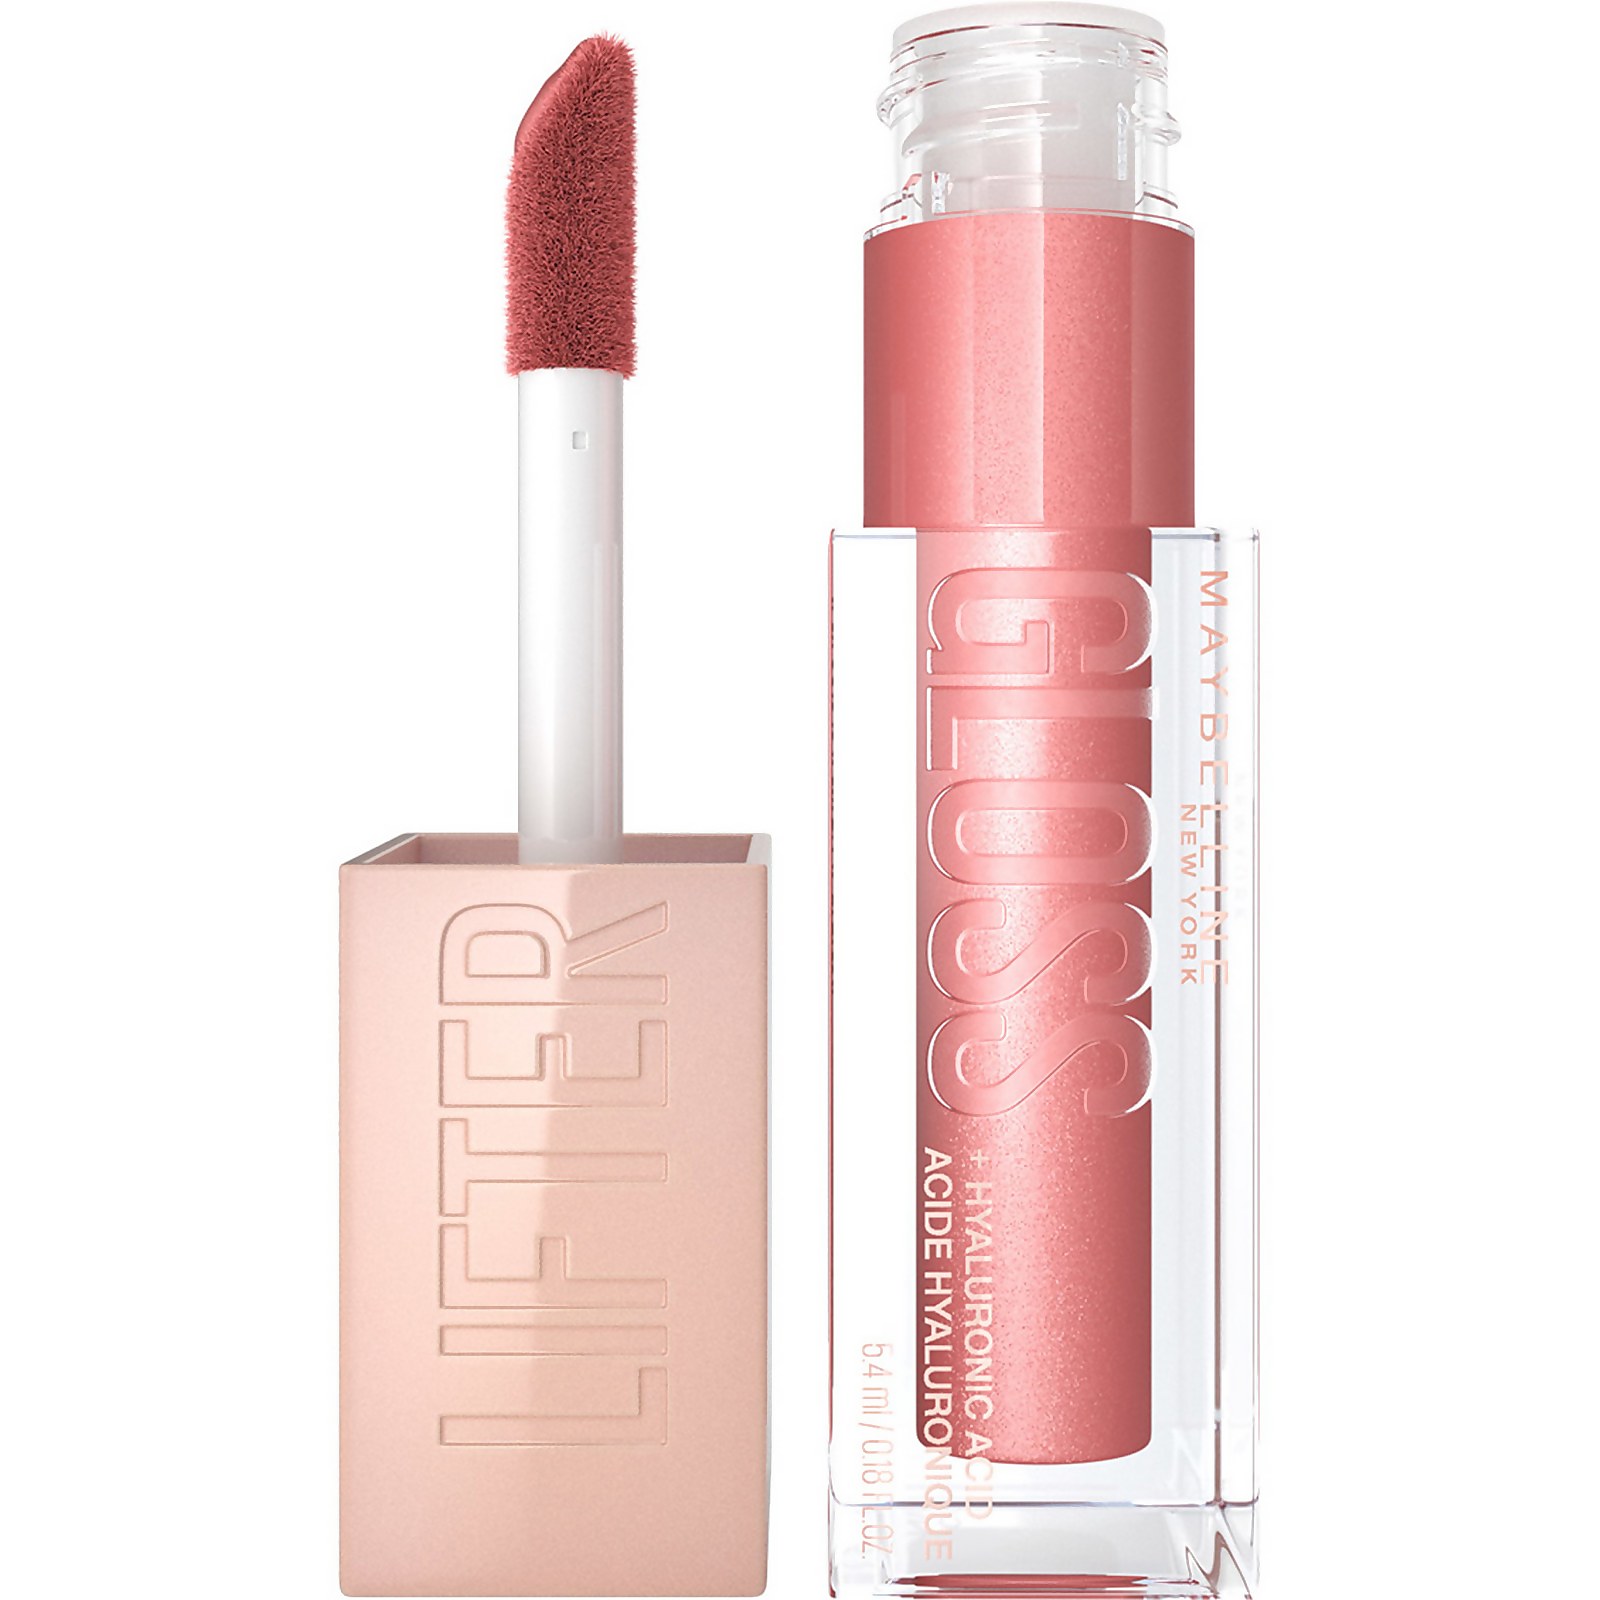 Image of Maybelline Lifter Gloss Hydrating Lip Gloss with Hyaluronic Acid 5g (Various Shades) - 003 Moon